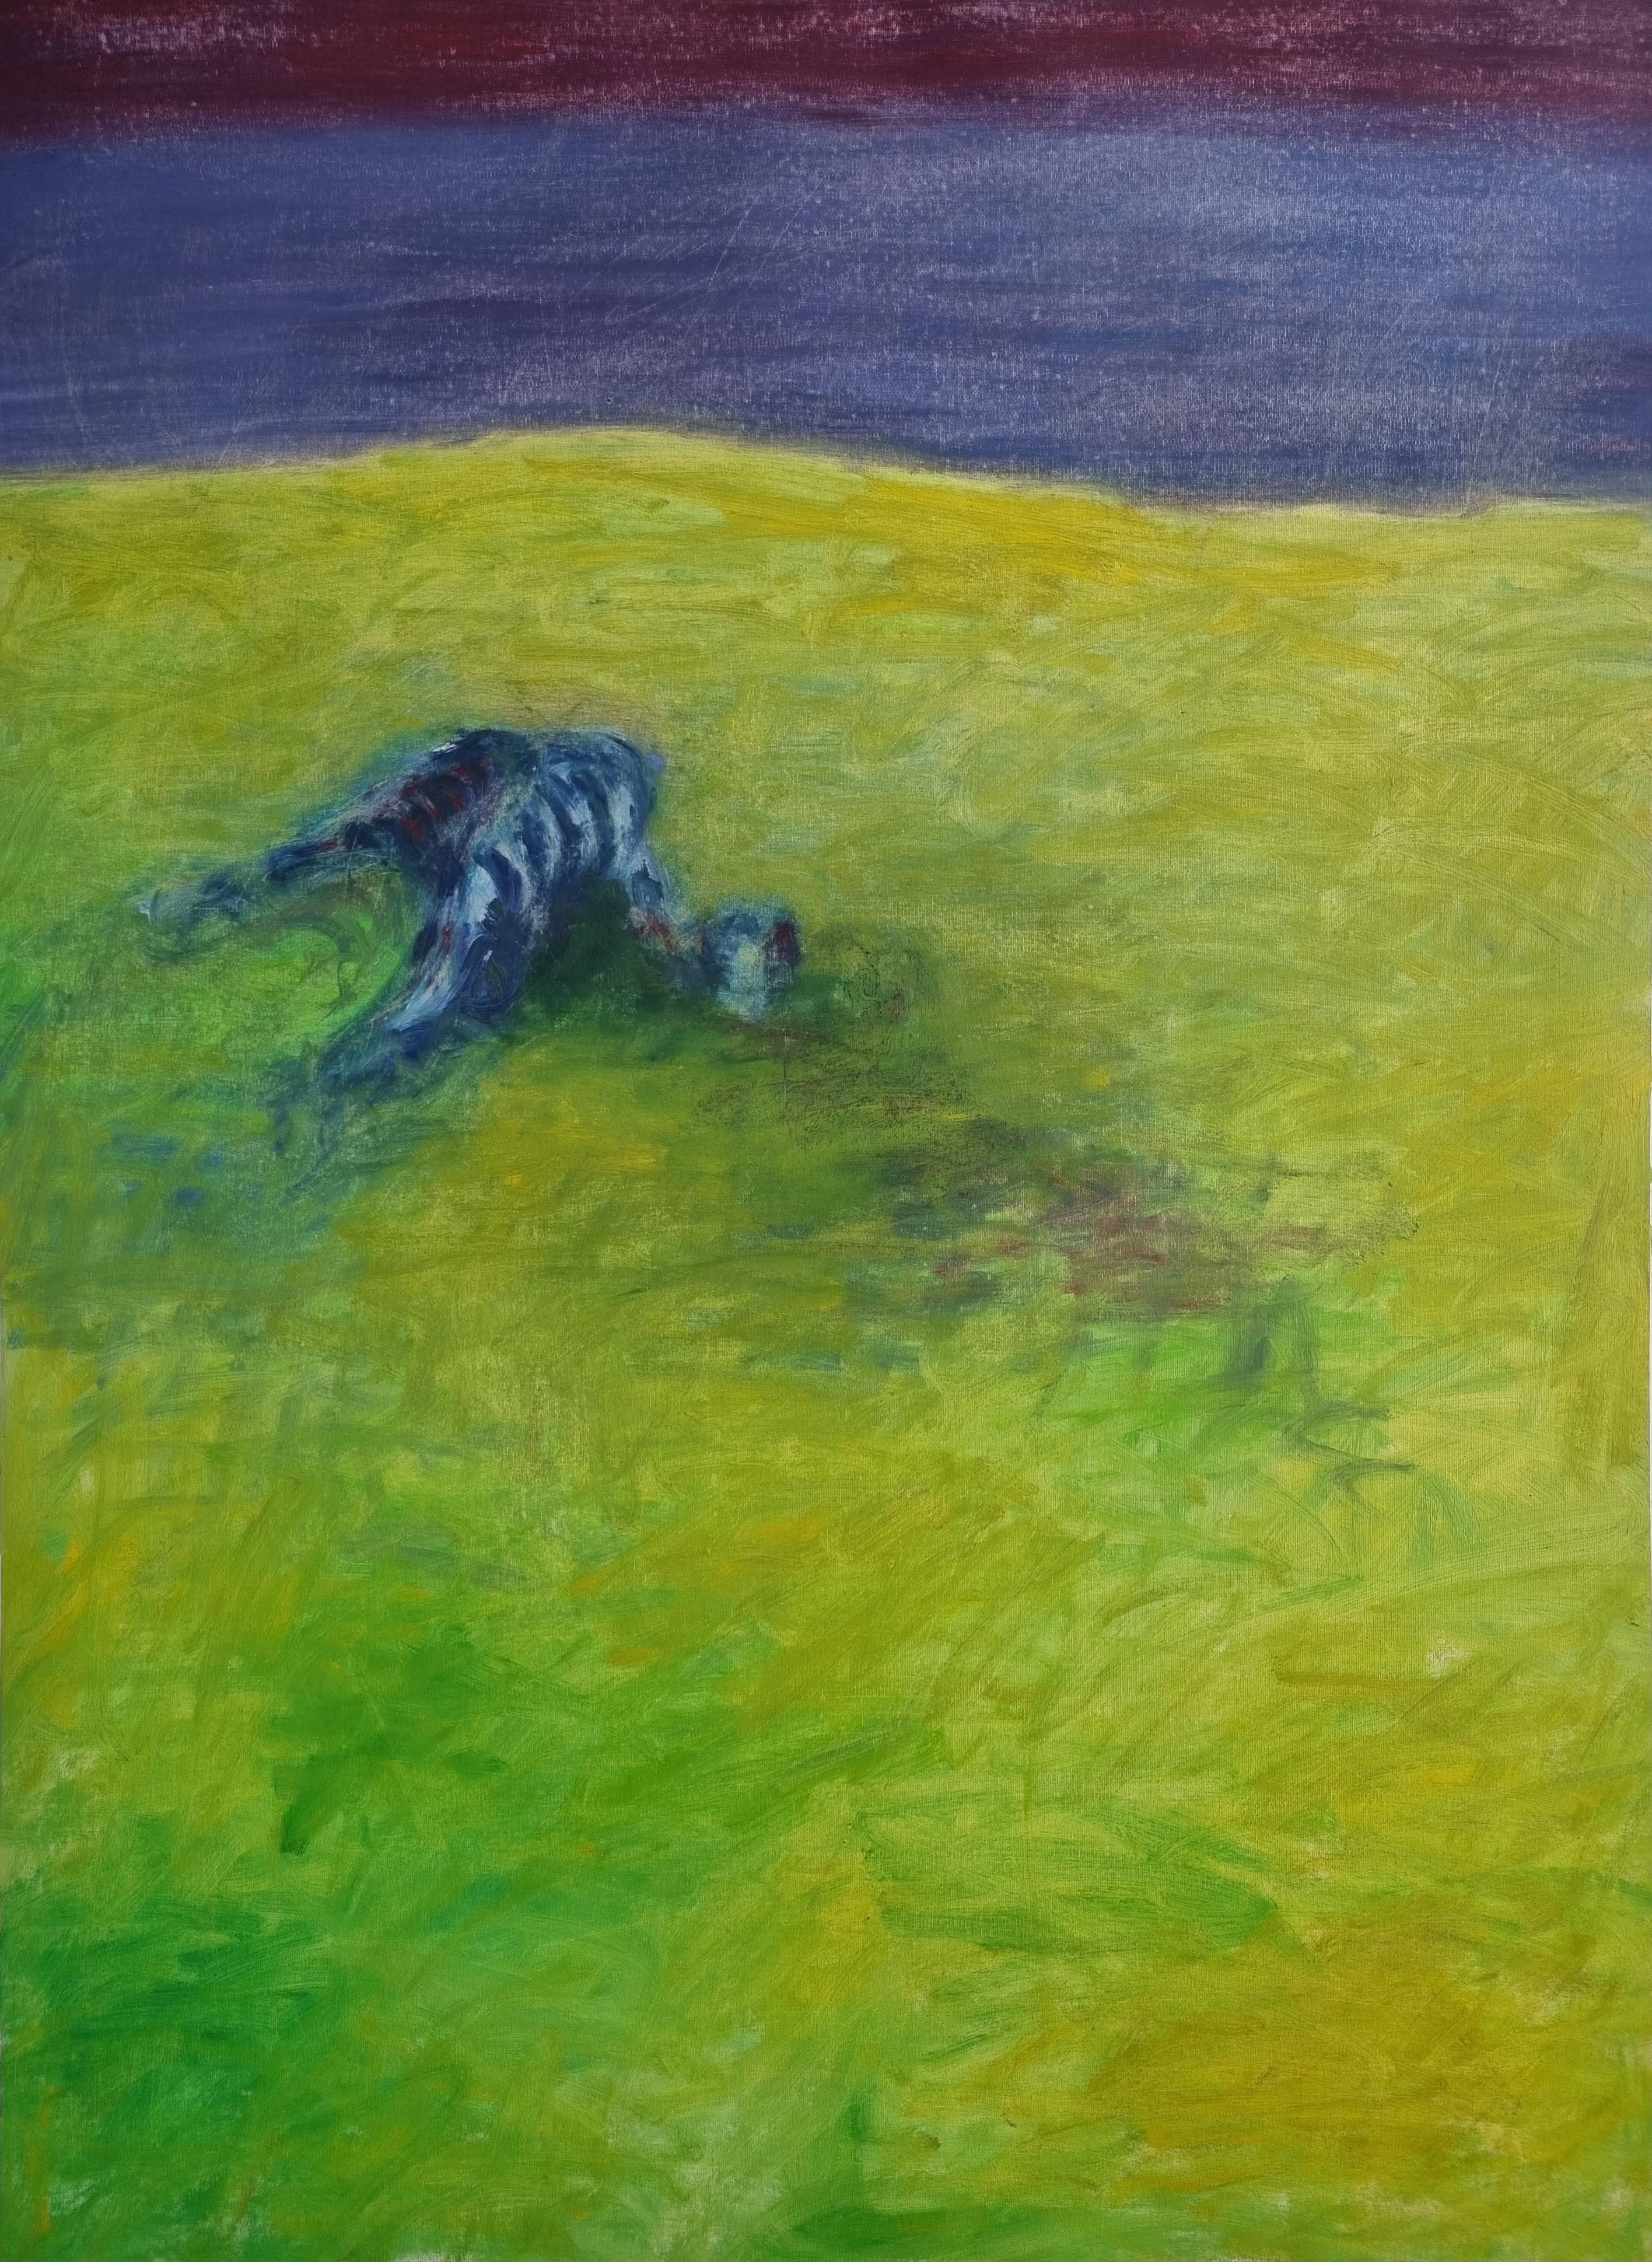 Body in the Field 1 - 21st Century, Landscape, Green, Blue, Painting